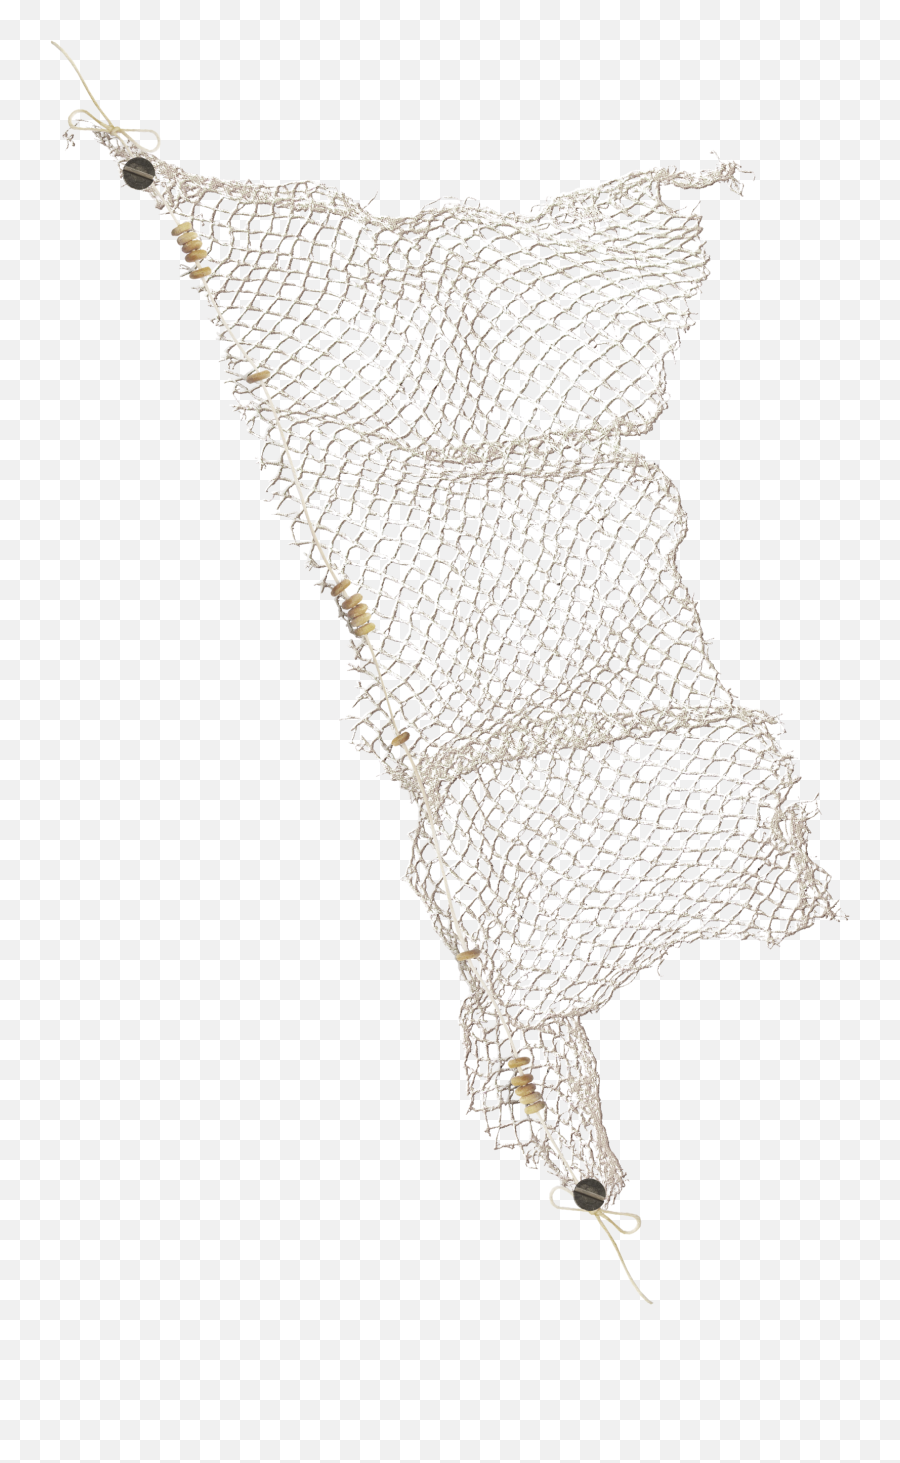 Png Images Pngs Fishing Net